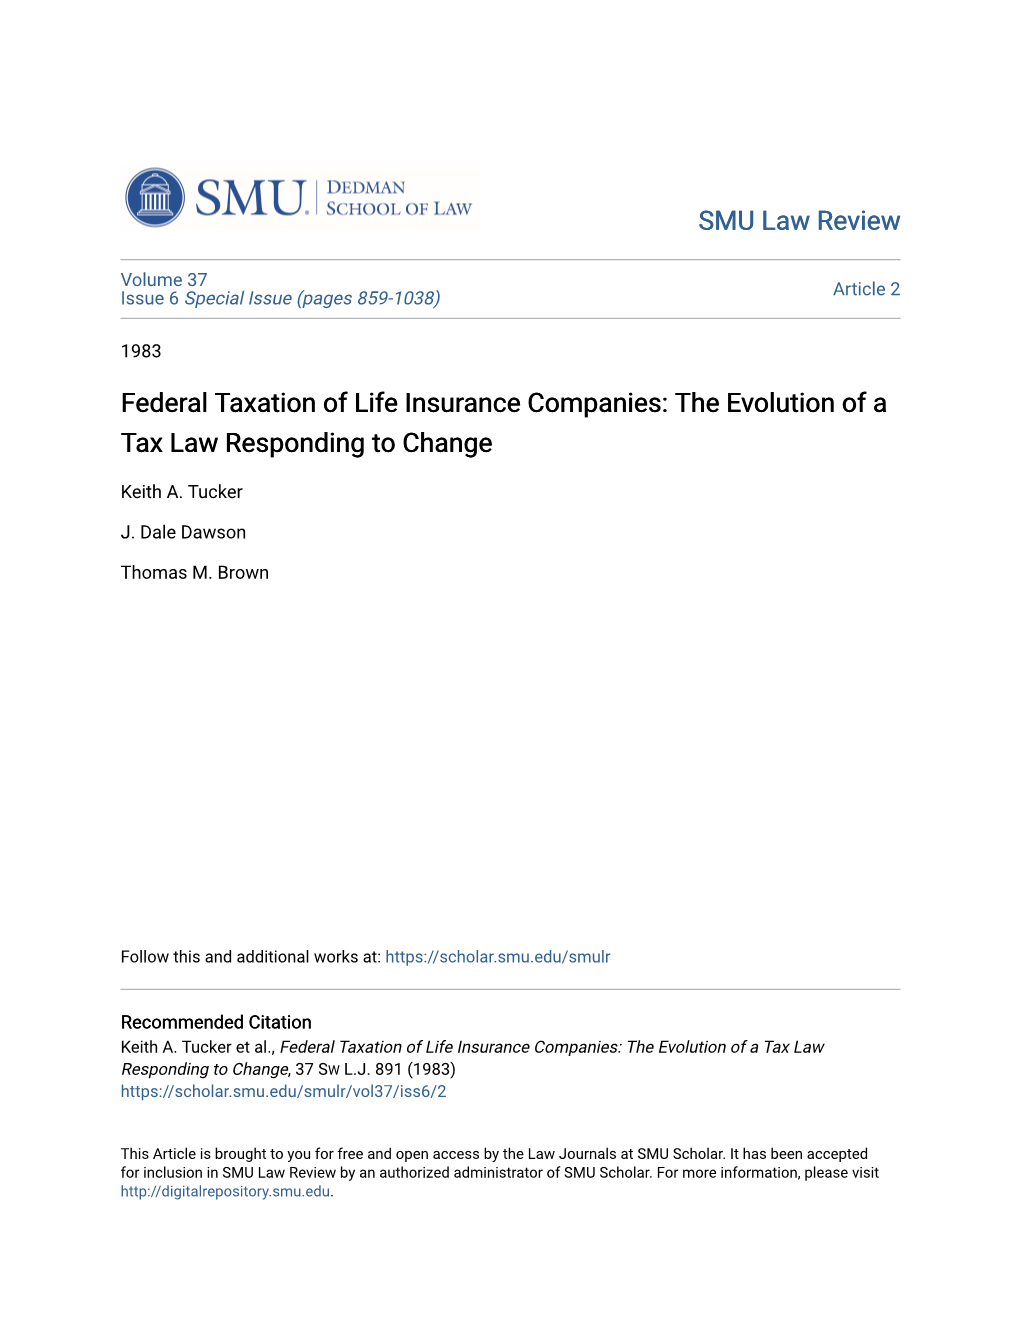 Federal Taxation of Life Insurance Companies: the Evolution of a Tax Law Responding to Change